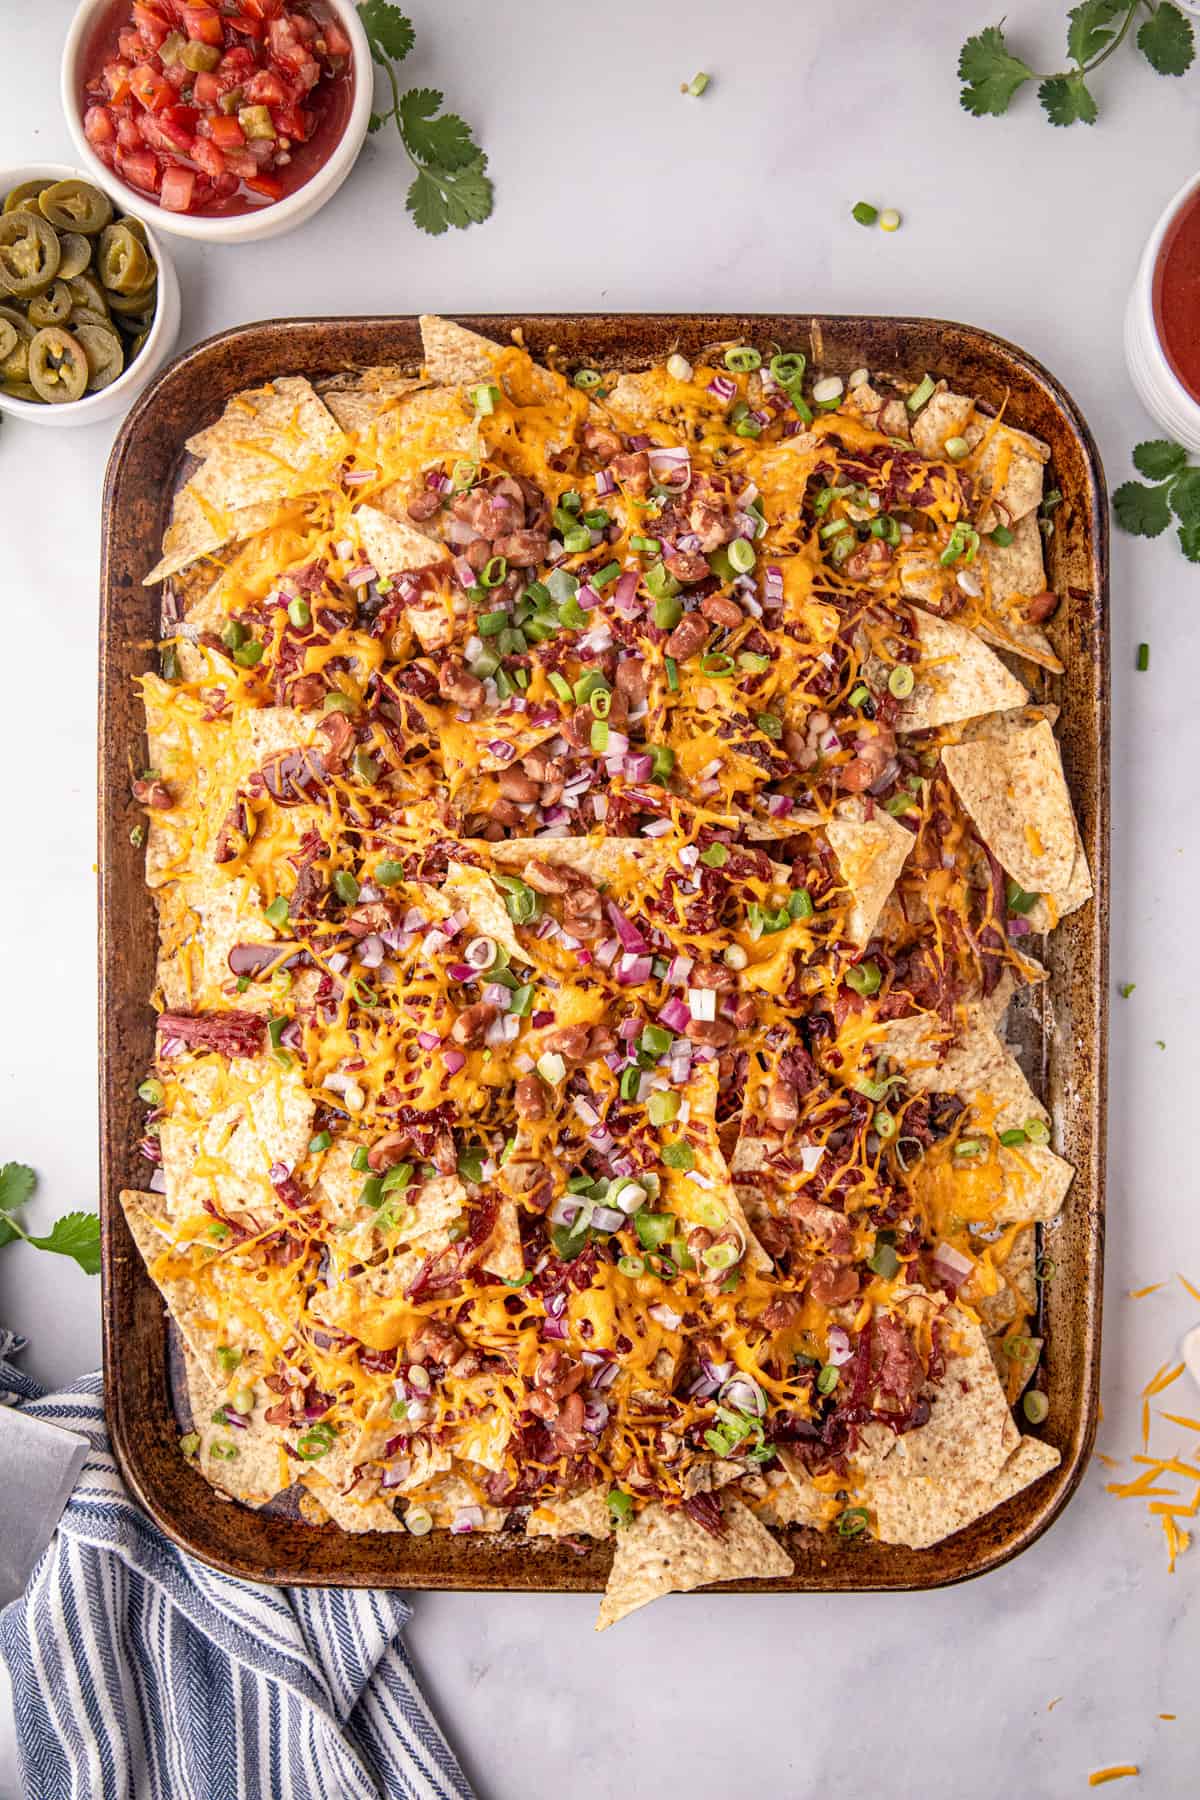 Beef Brisket Nachos Recipe on baking sheet ready to load up with extra toppings